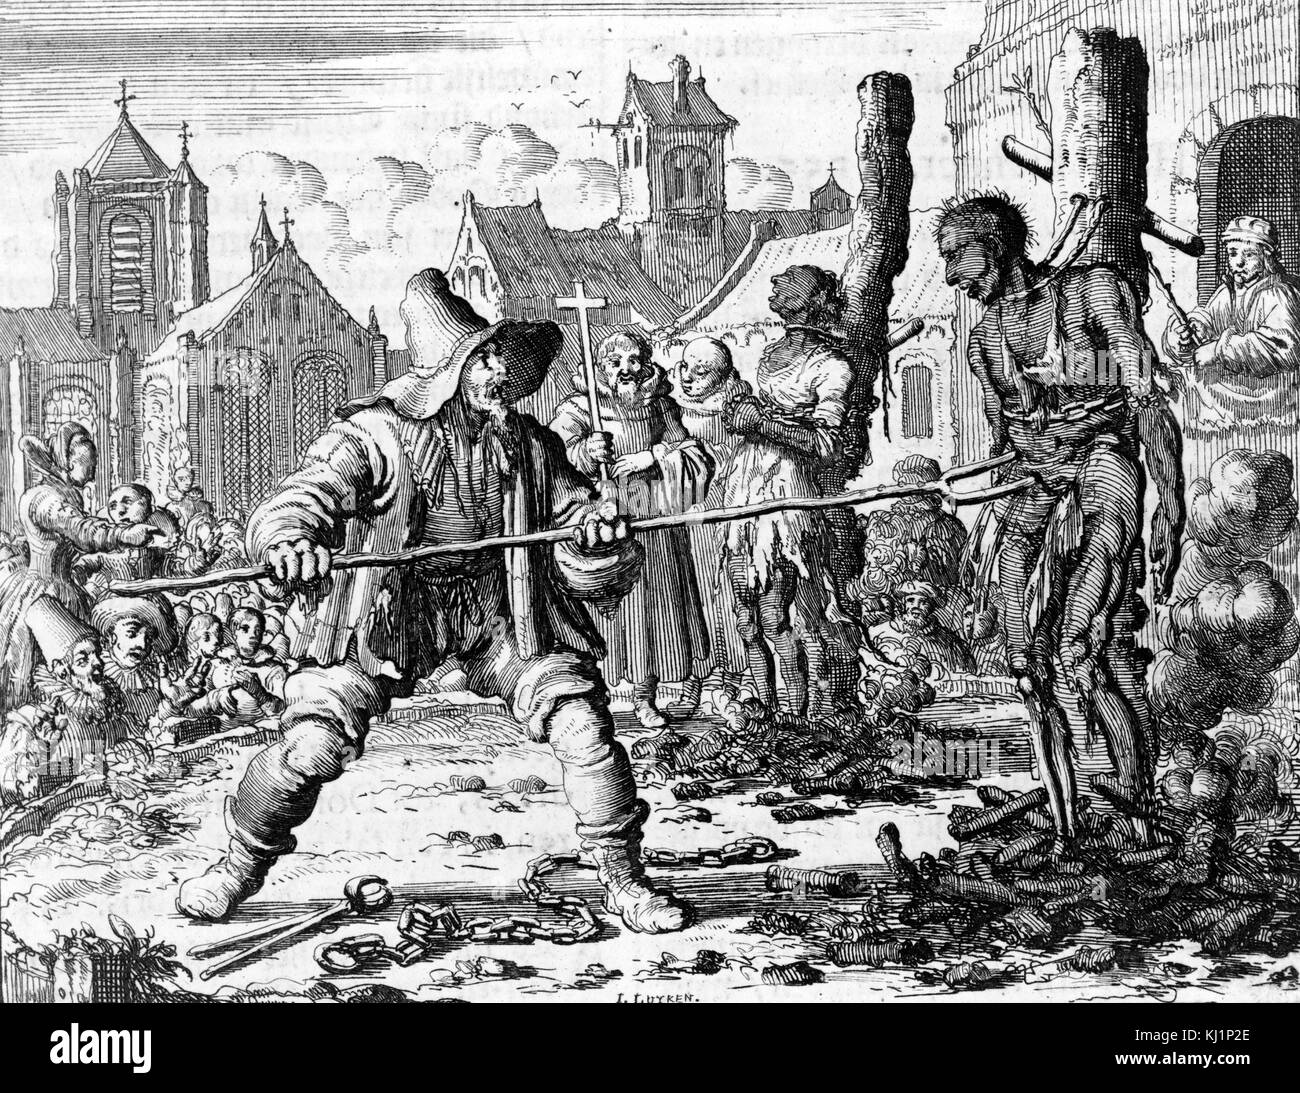 David van der Leyen (or Verleyen), an Anabaptist martyr, was executed with Levina Ghyselius at Ghent, Belgium on 14 February 1554 by burning at the stake. Engraving by Jan Luiken in Martyrs' Mirror, v. 2, p. 161 of Dutch edition. Stock Photo